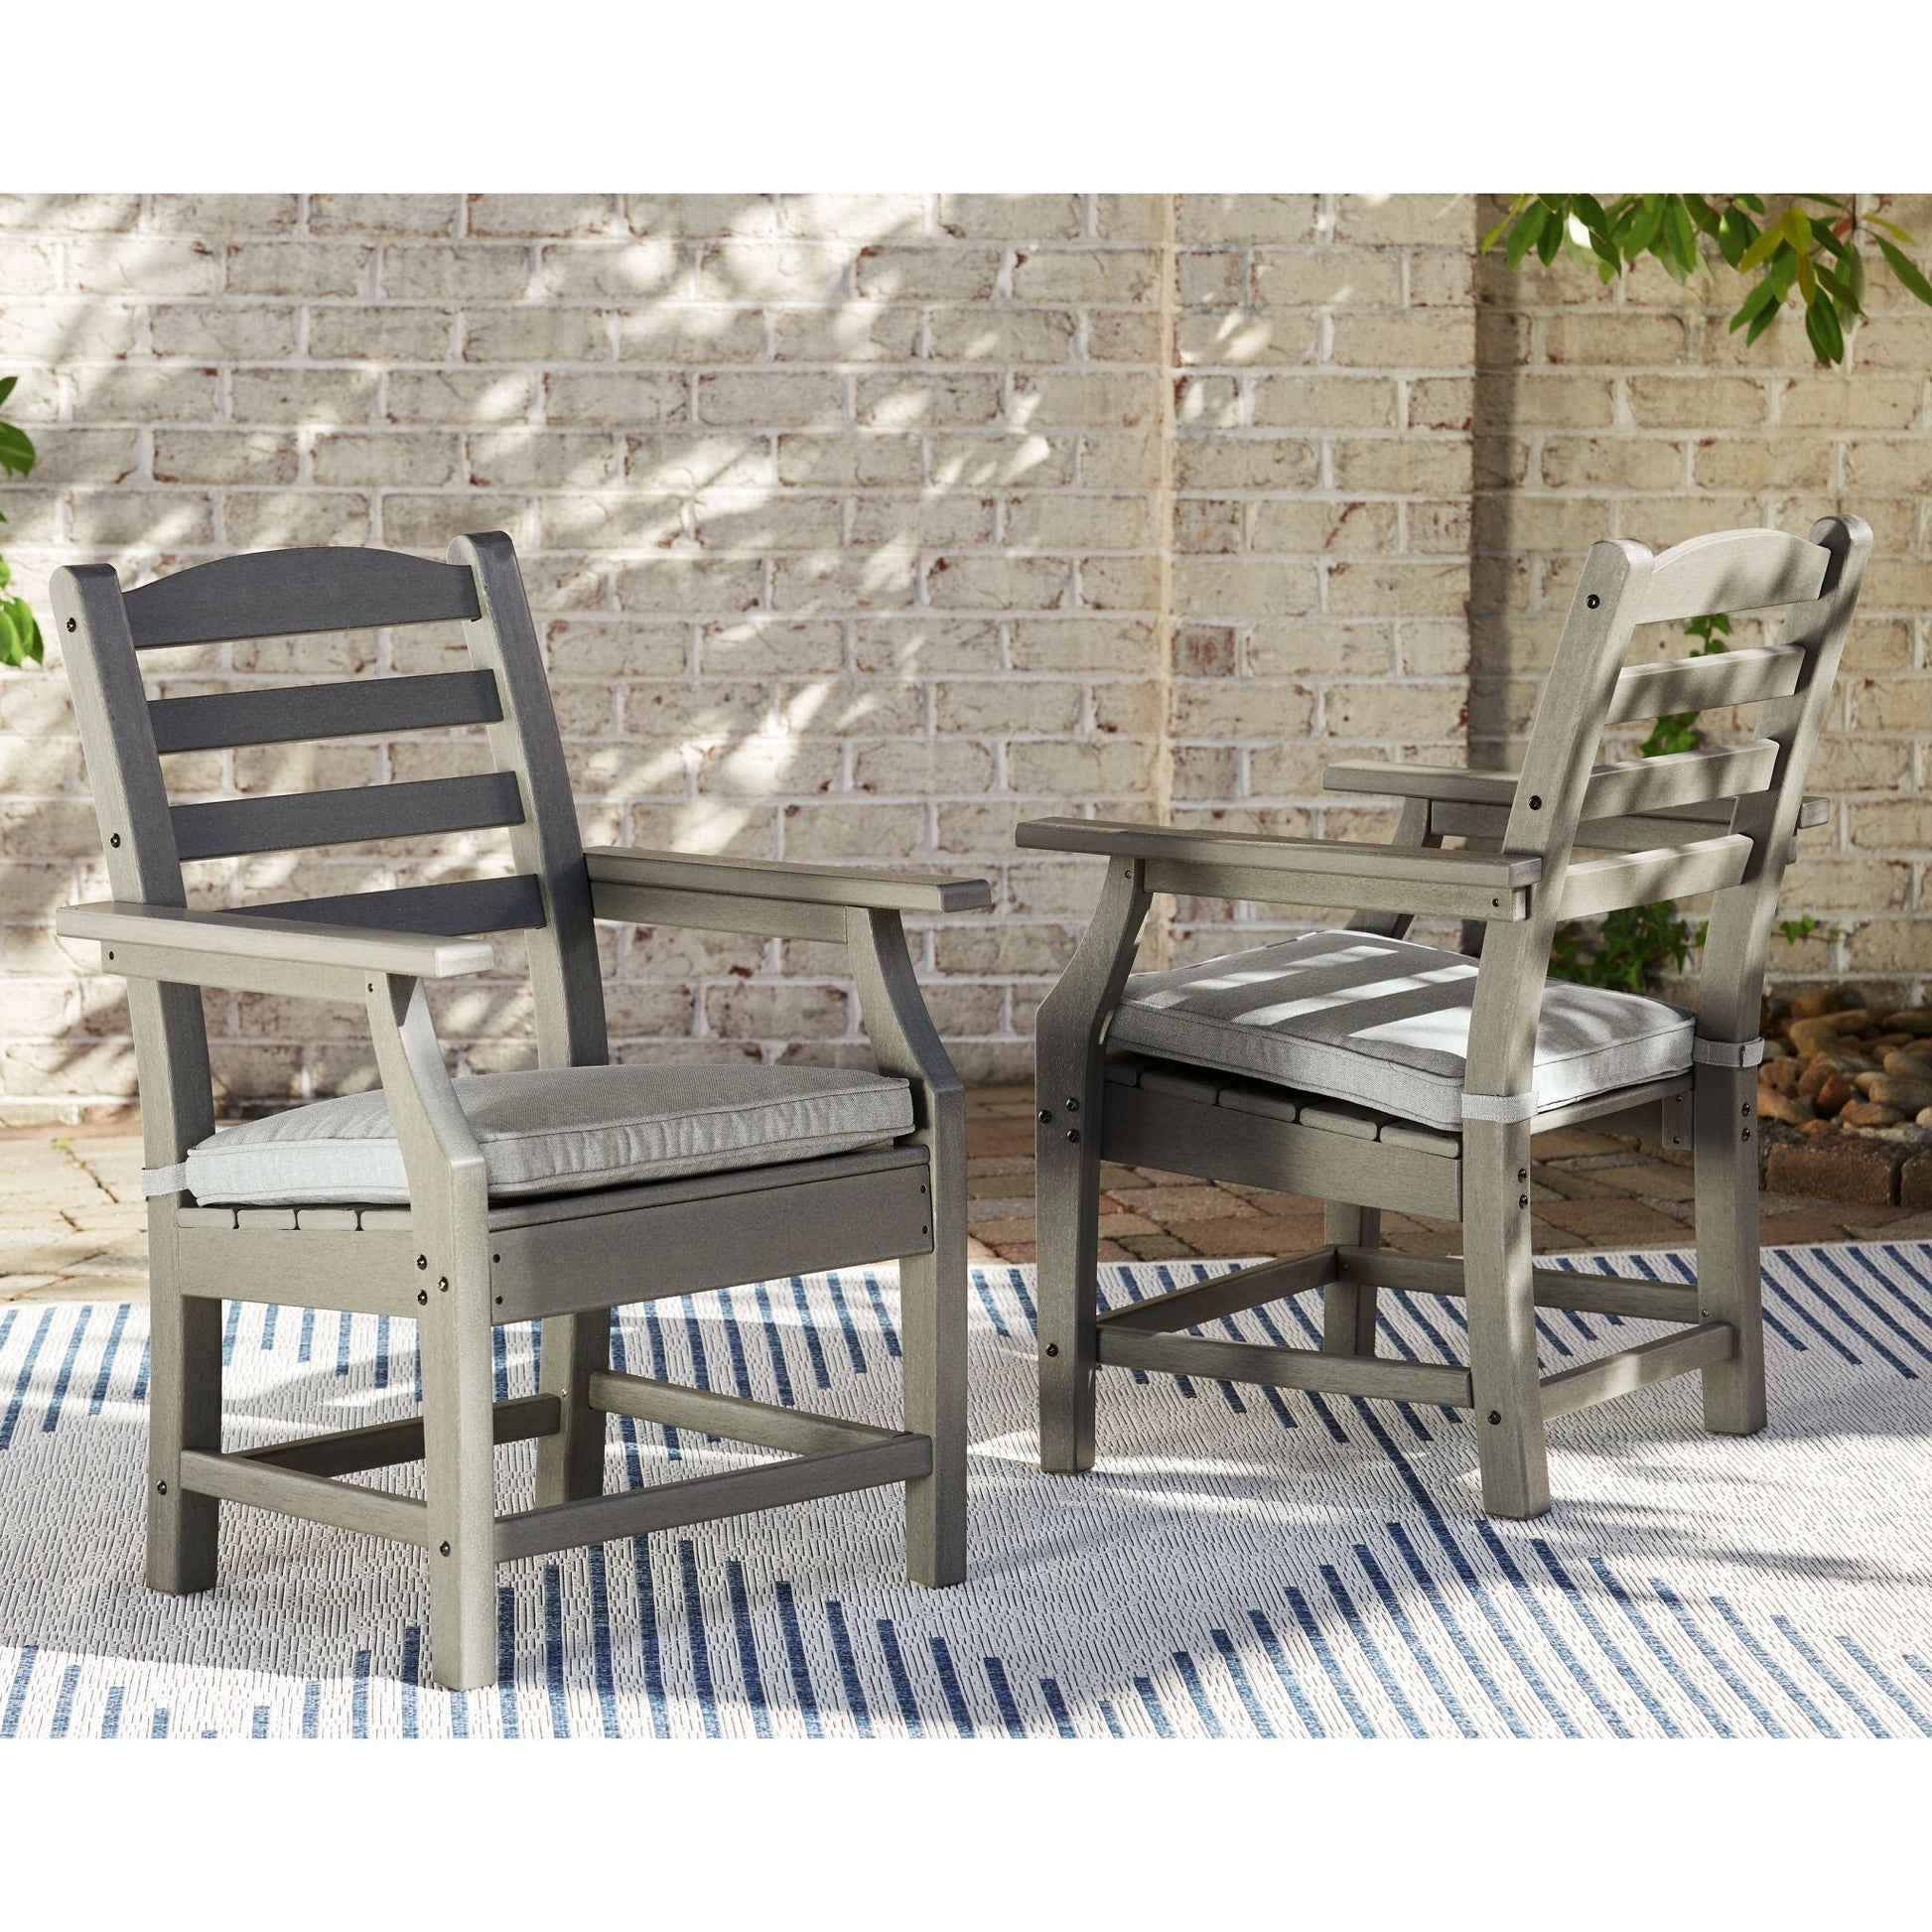 Outdoor Visola Chair-Set of 2 Gray